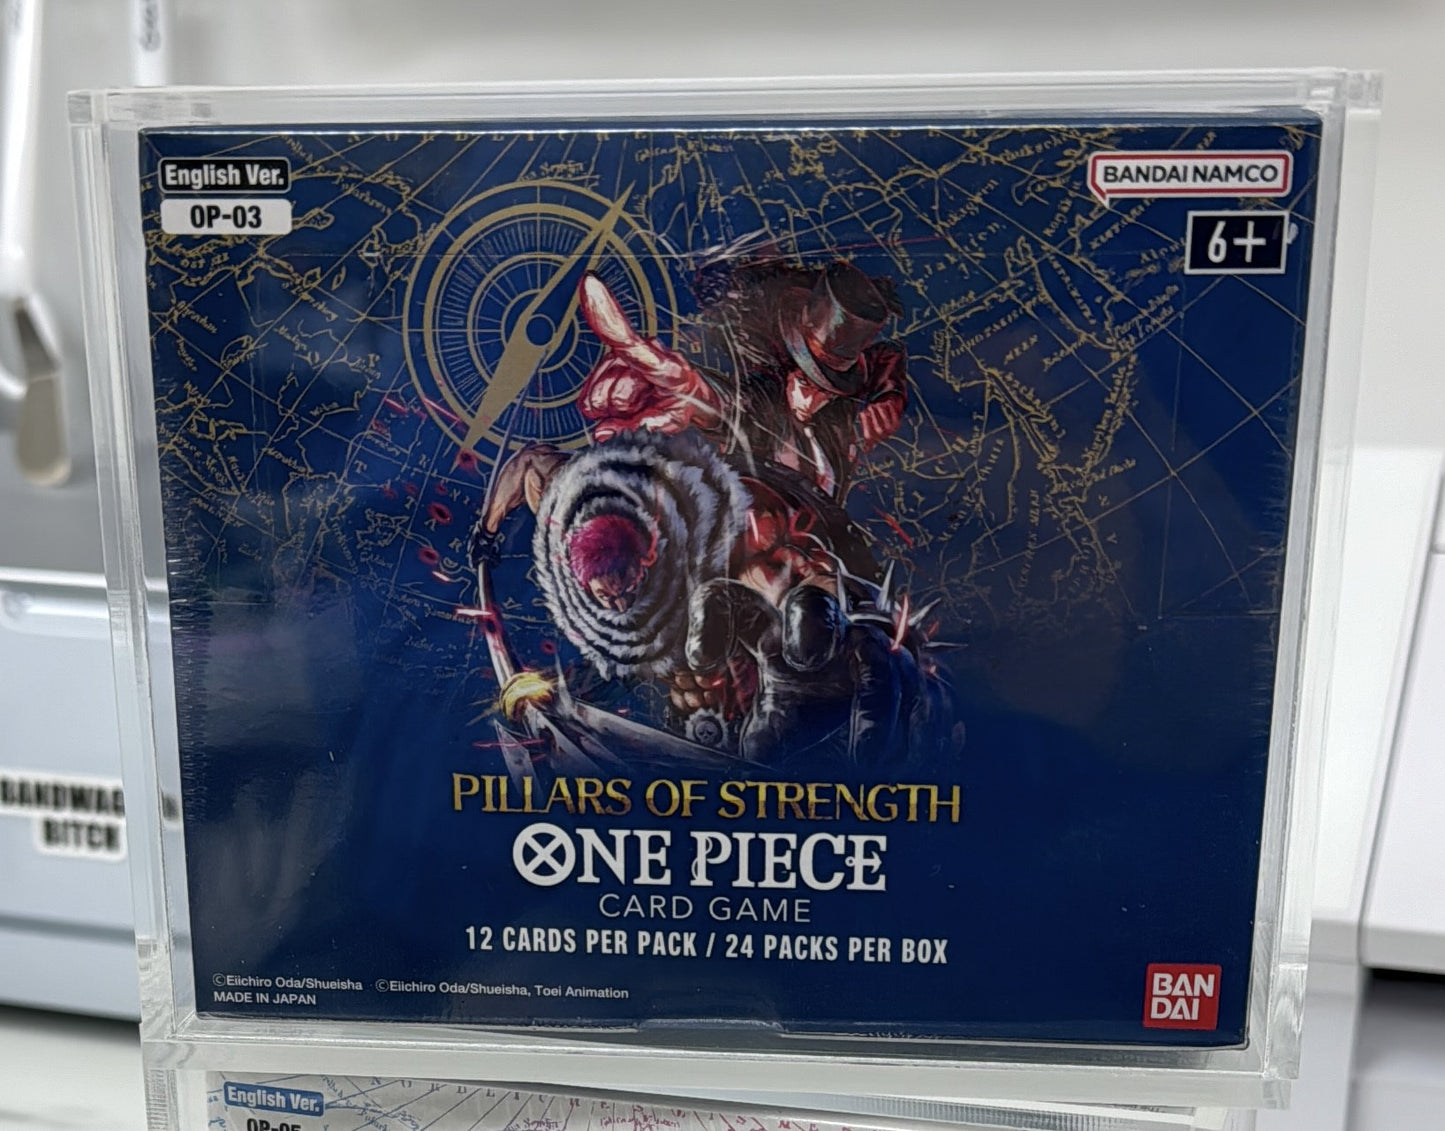 One Piece Booster Box Acrylic Display Case (ENGLISH)